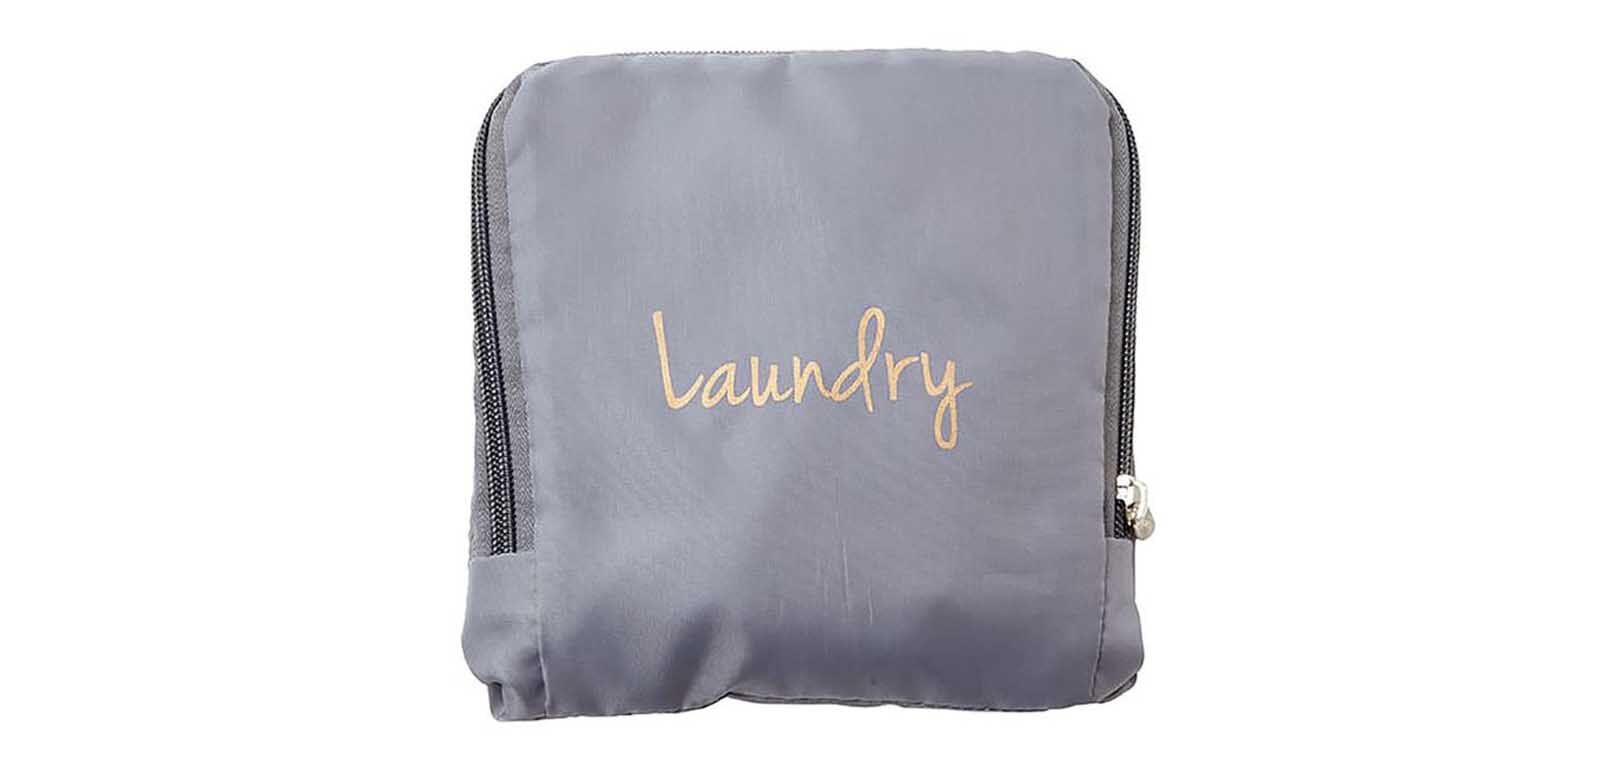 Best Travel Laundry Bags for Nomads on the Go